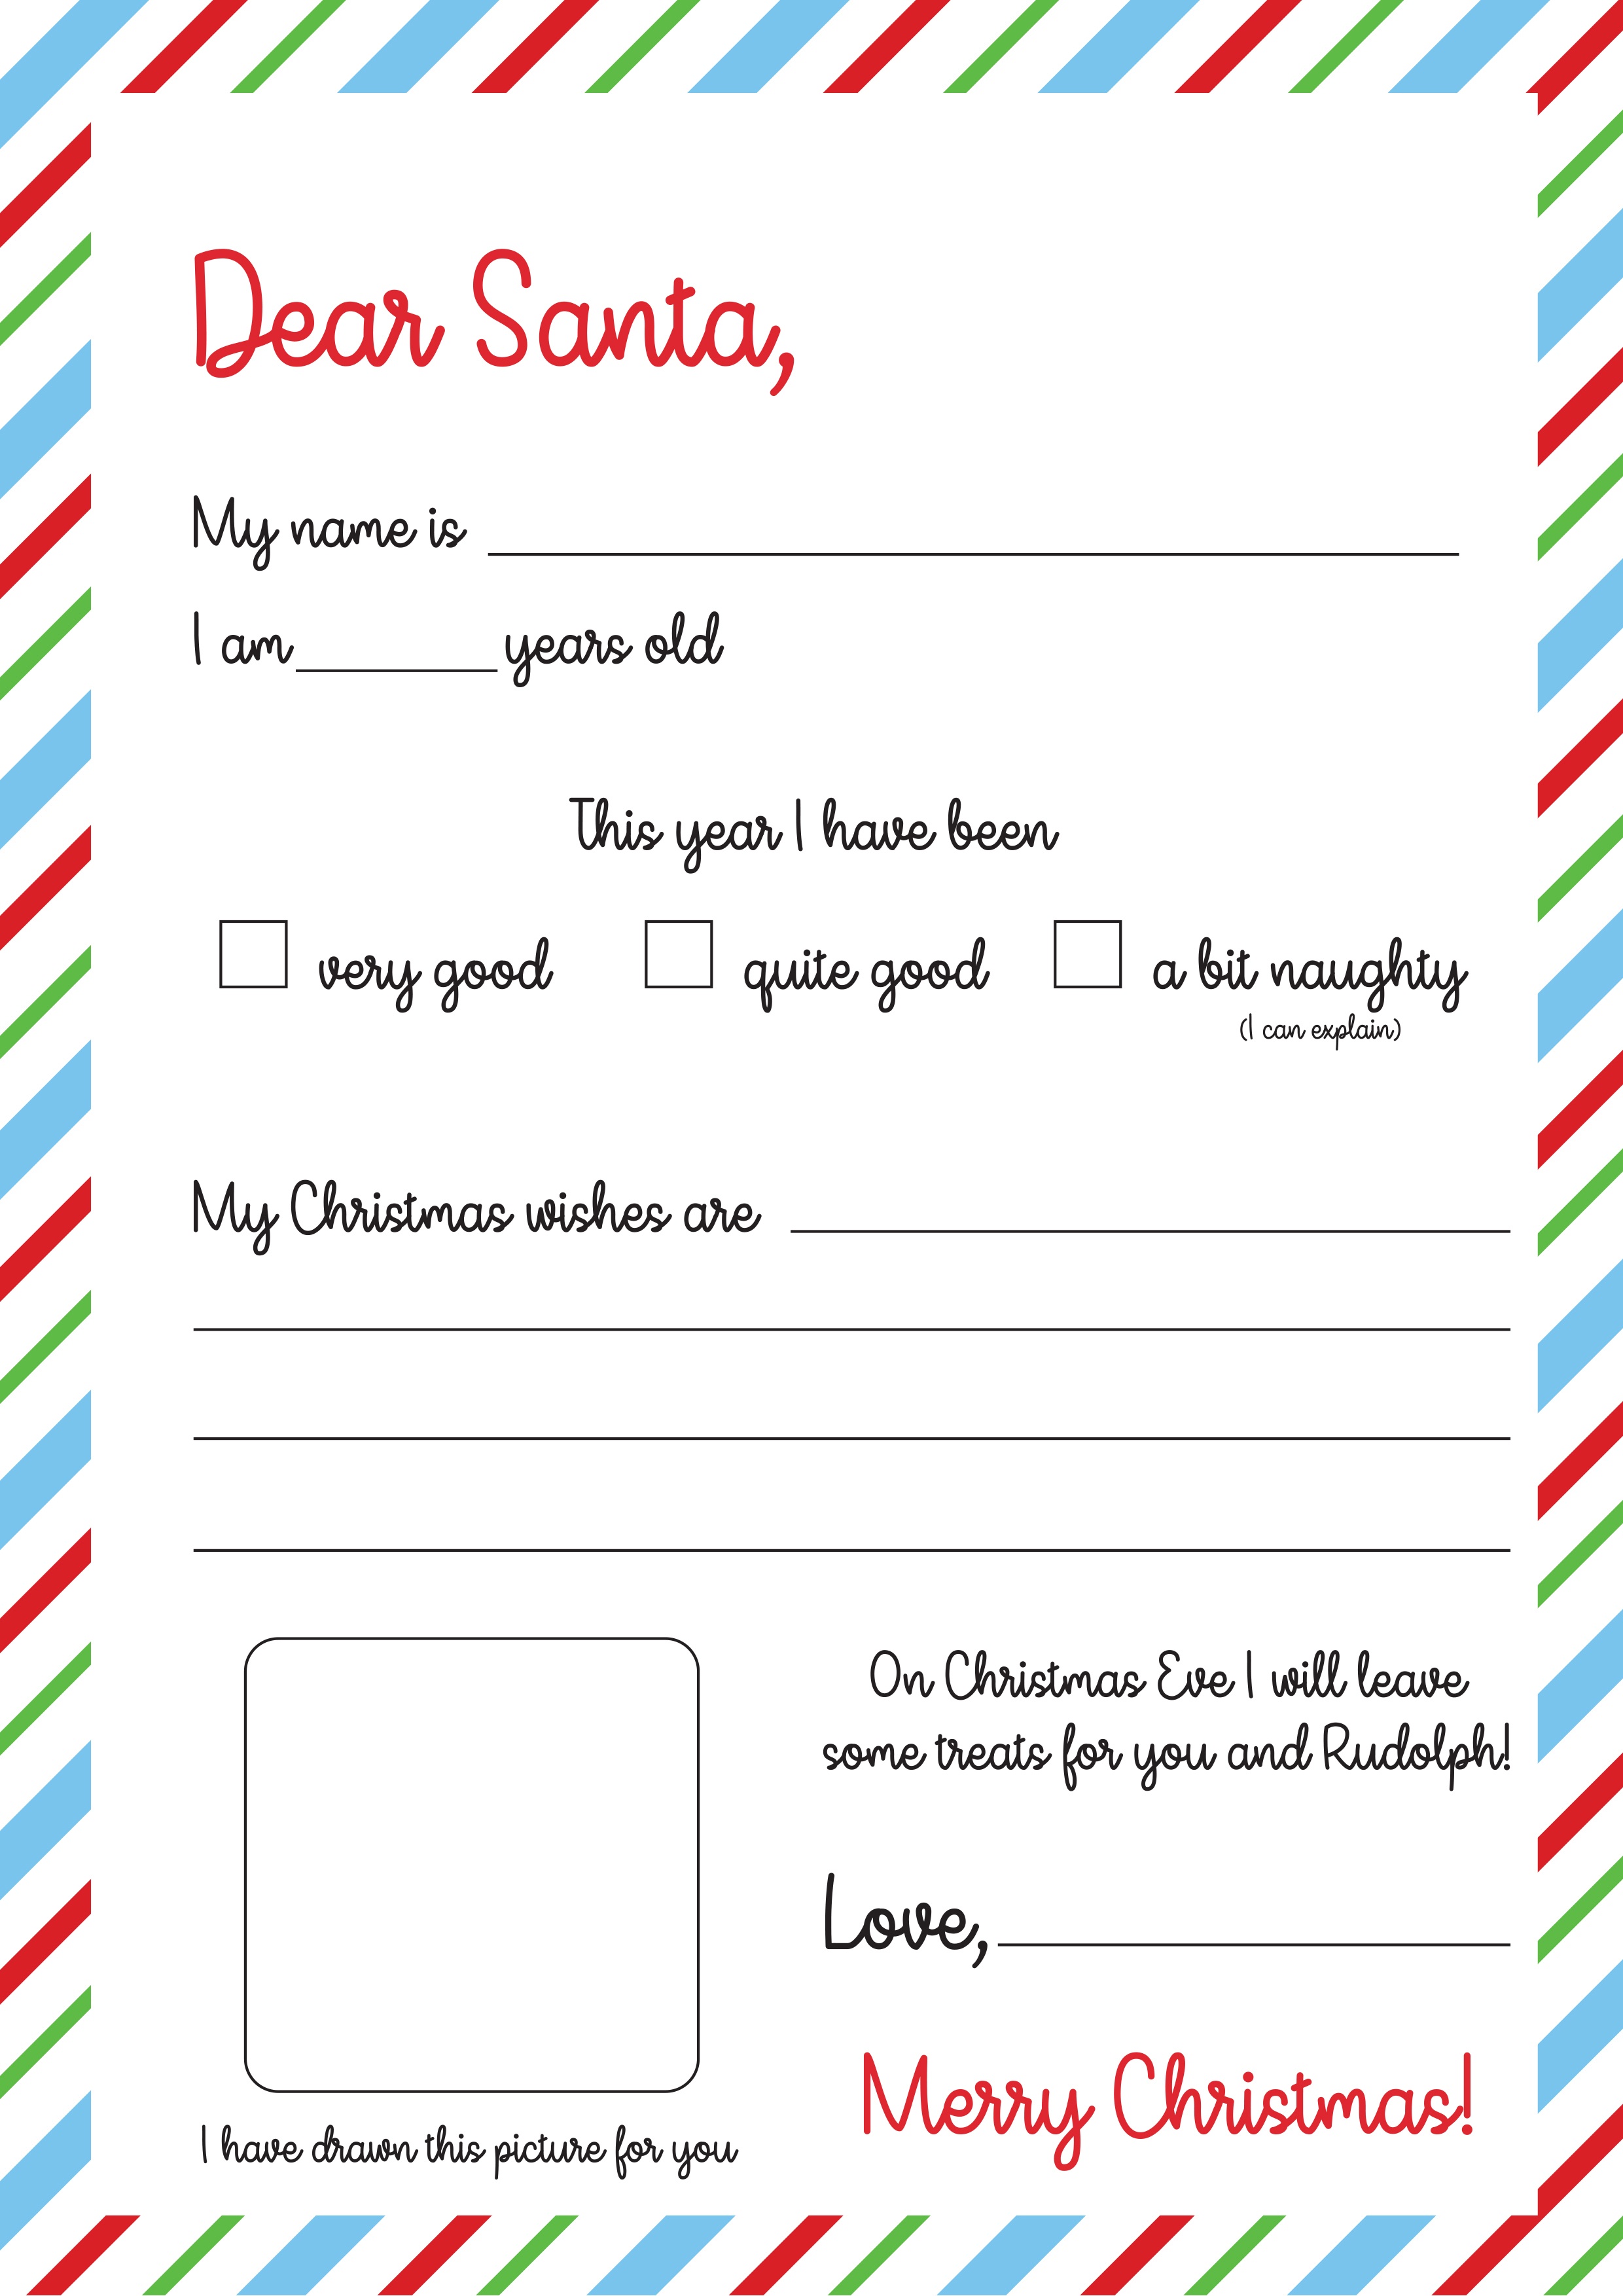 Free Letter To Santa Template Print | The Craft Blog - Letter To Santa Template Free Printable